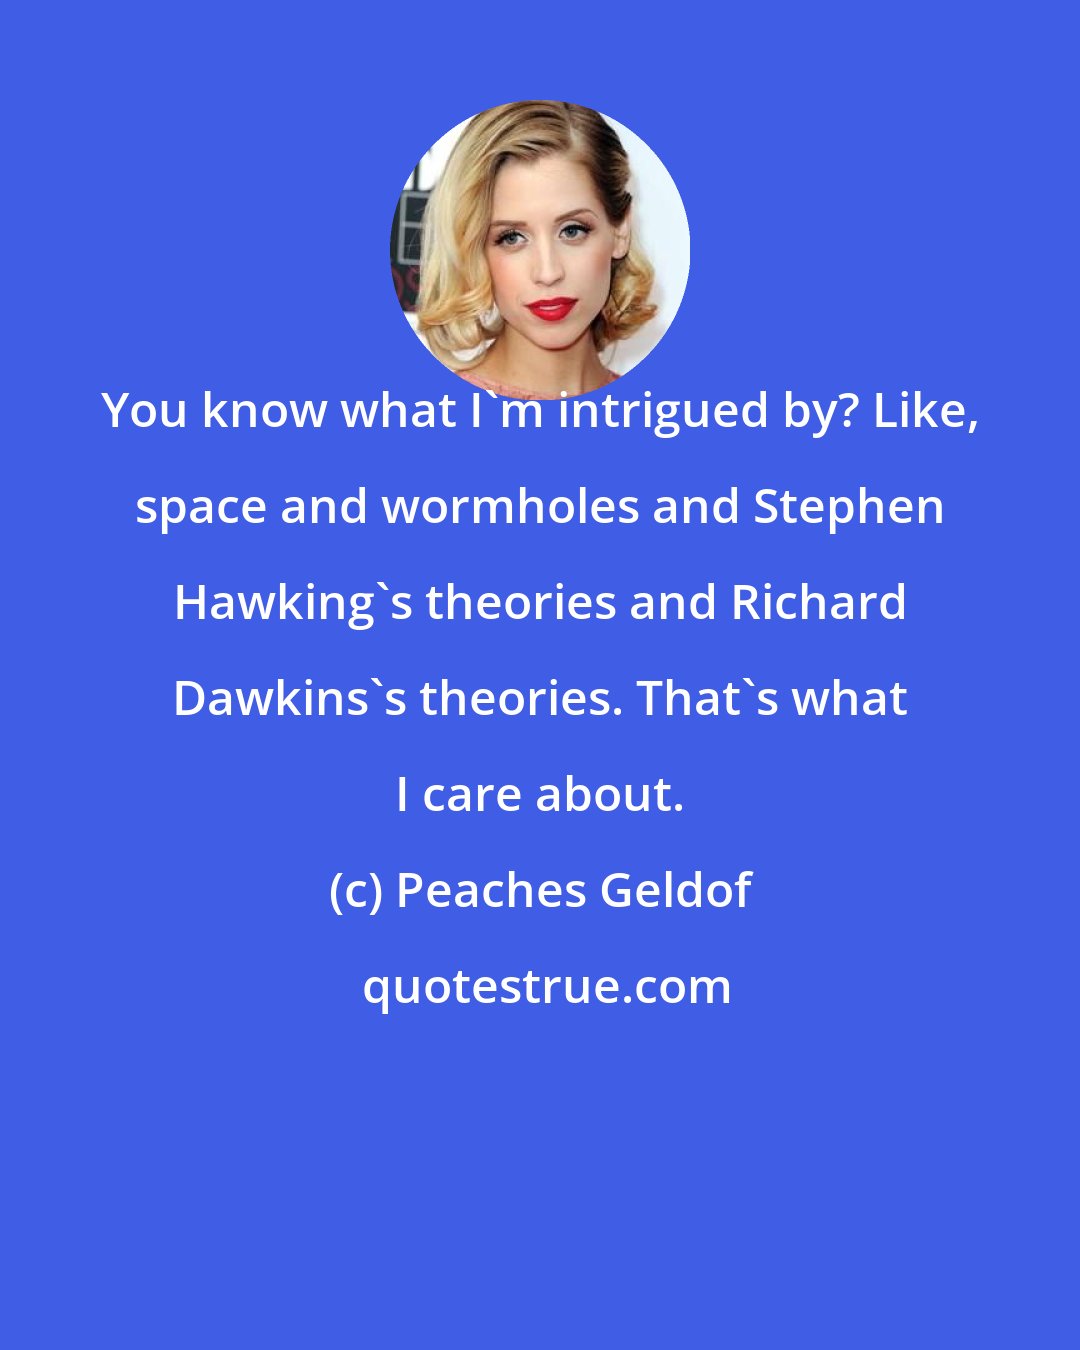 Peaches Geldof: You know what I'm intrigued by? Like, space and wormholes and Stephen Hawking's theories and Richard Dawkins's theories. That's what I care about.